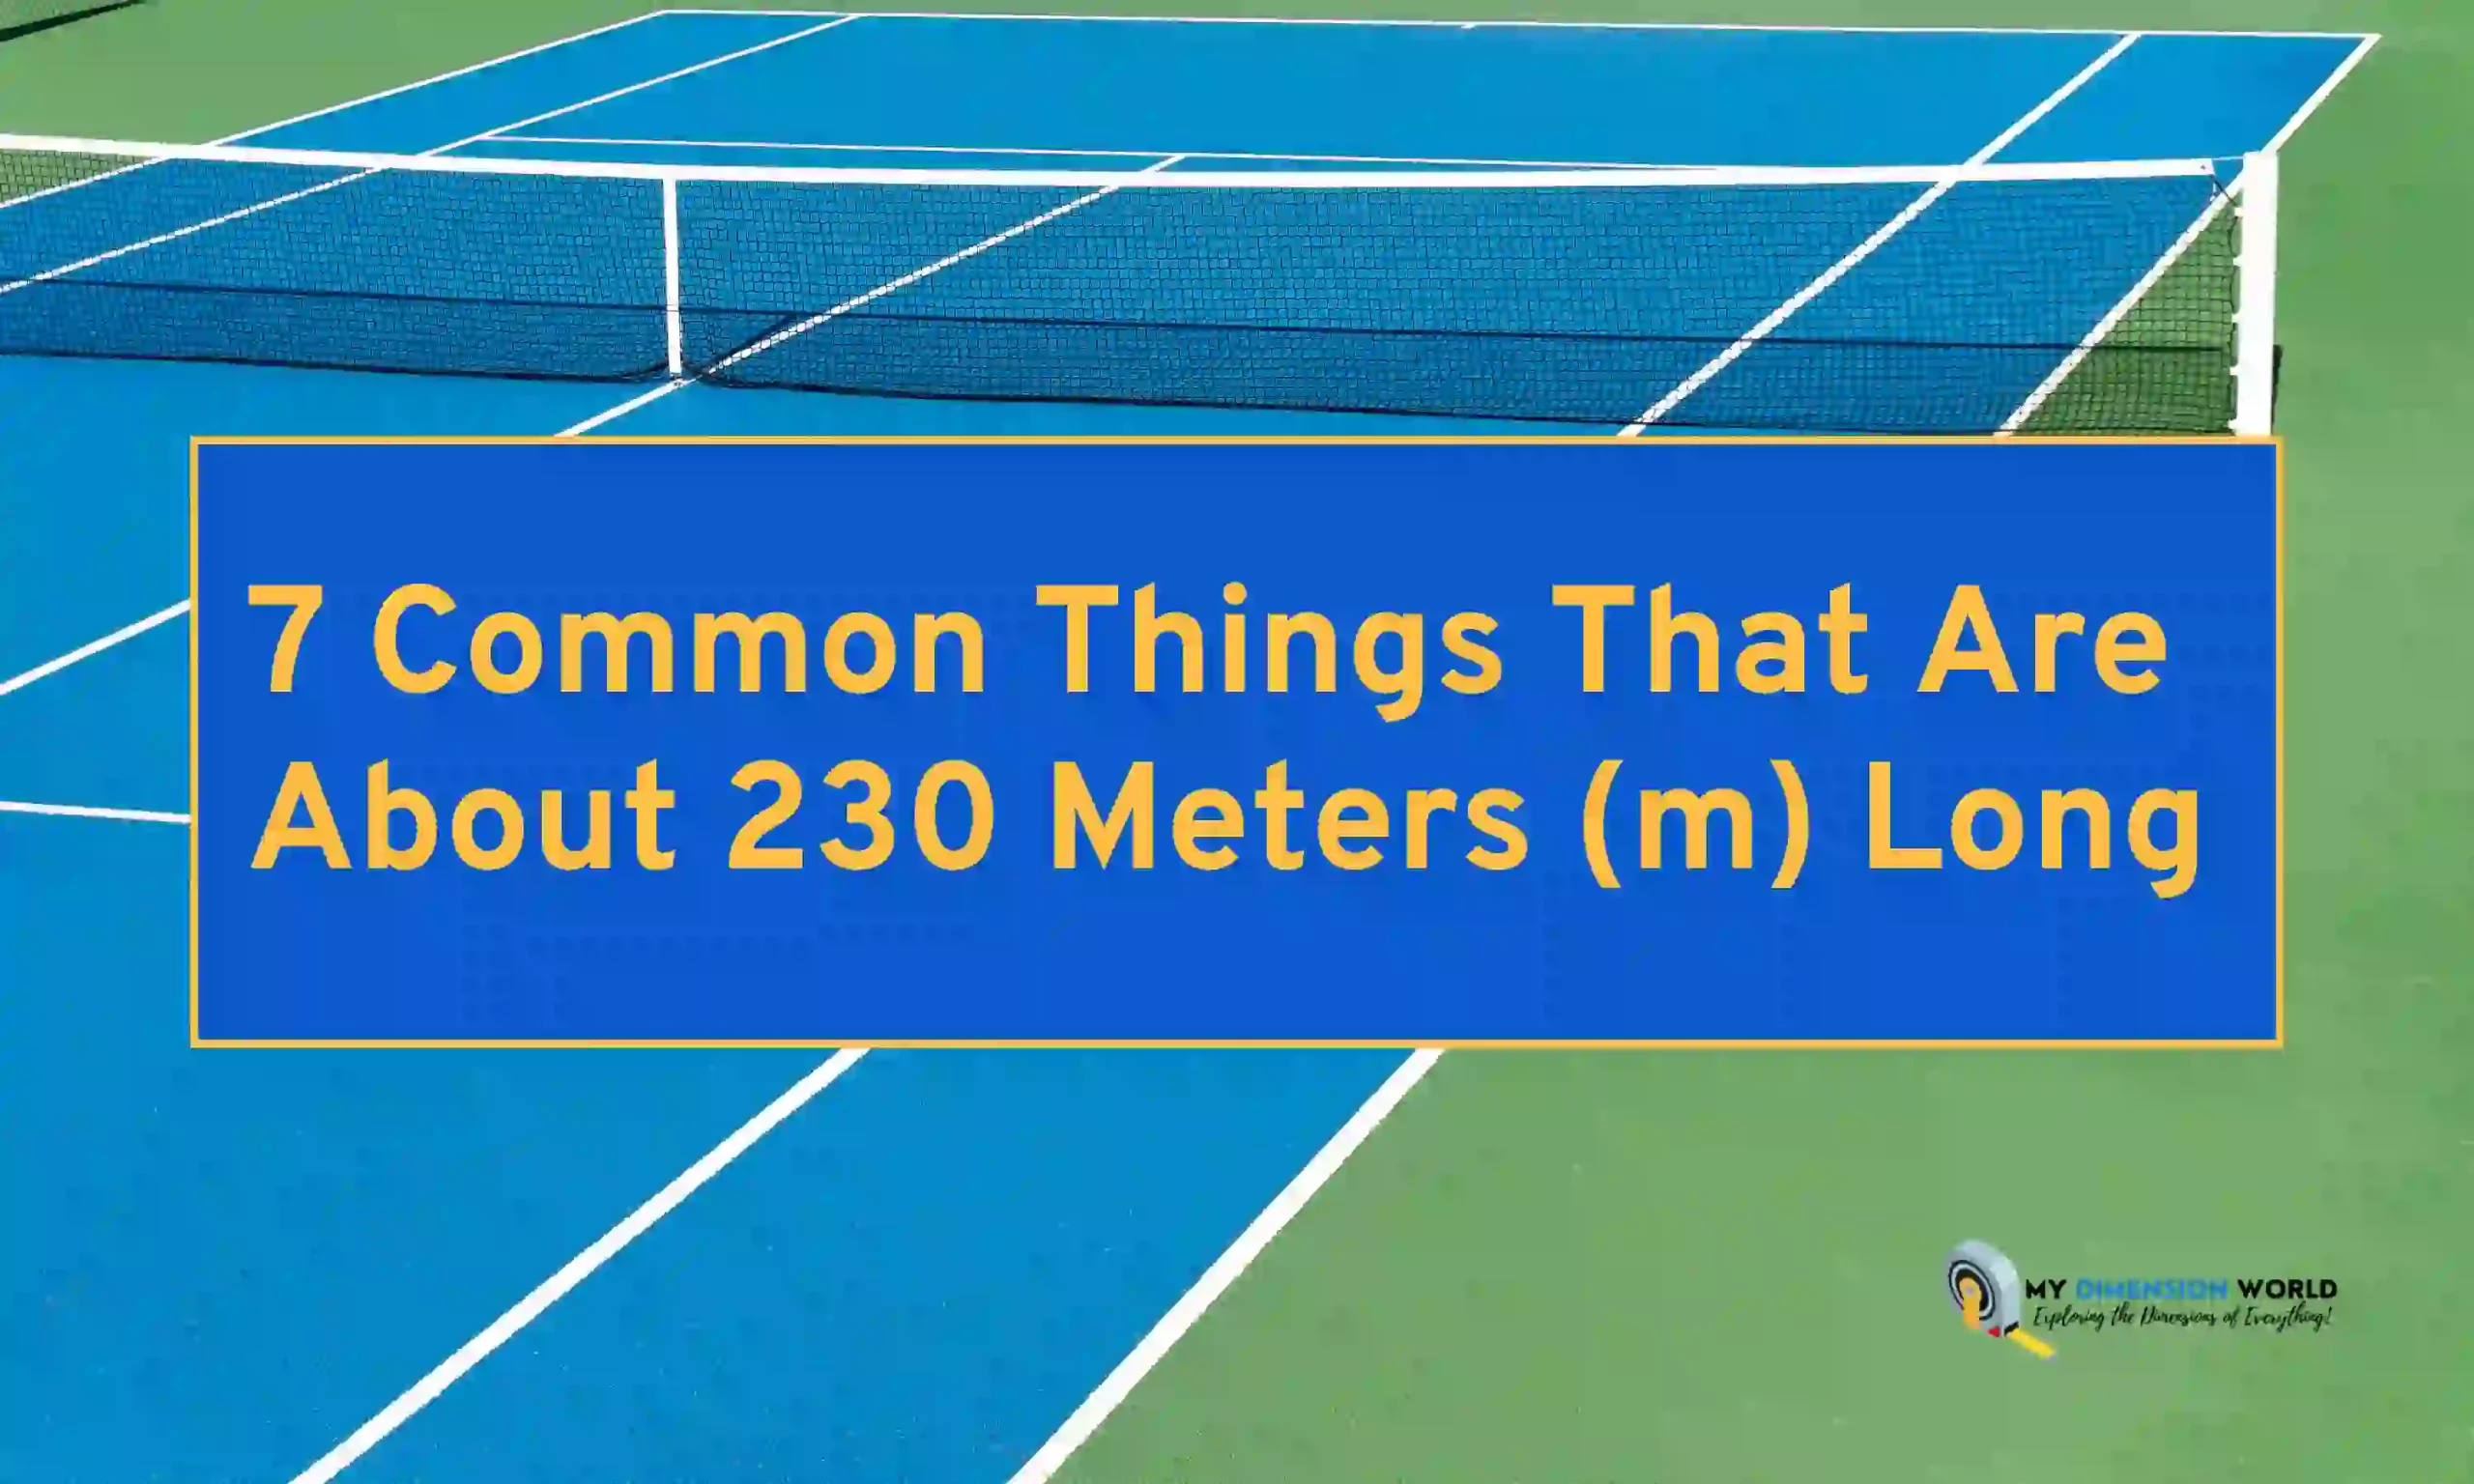 7 Common Things That Are About 230 Meters (m) Long